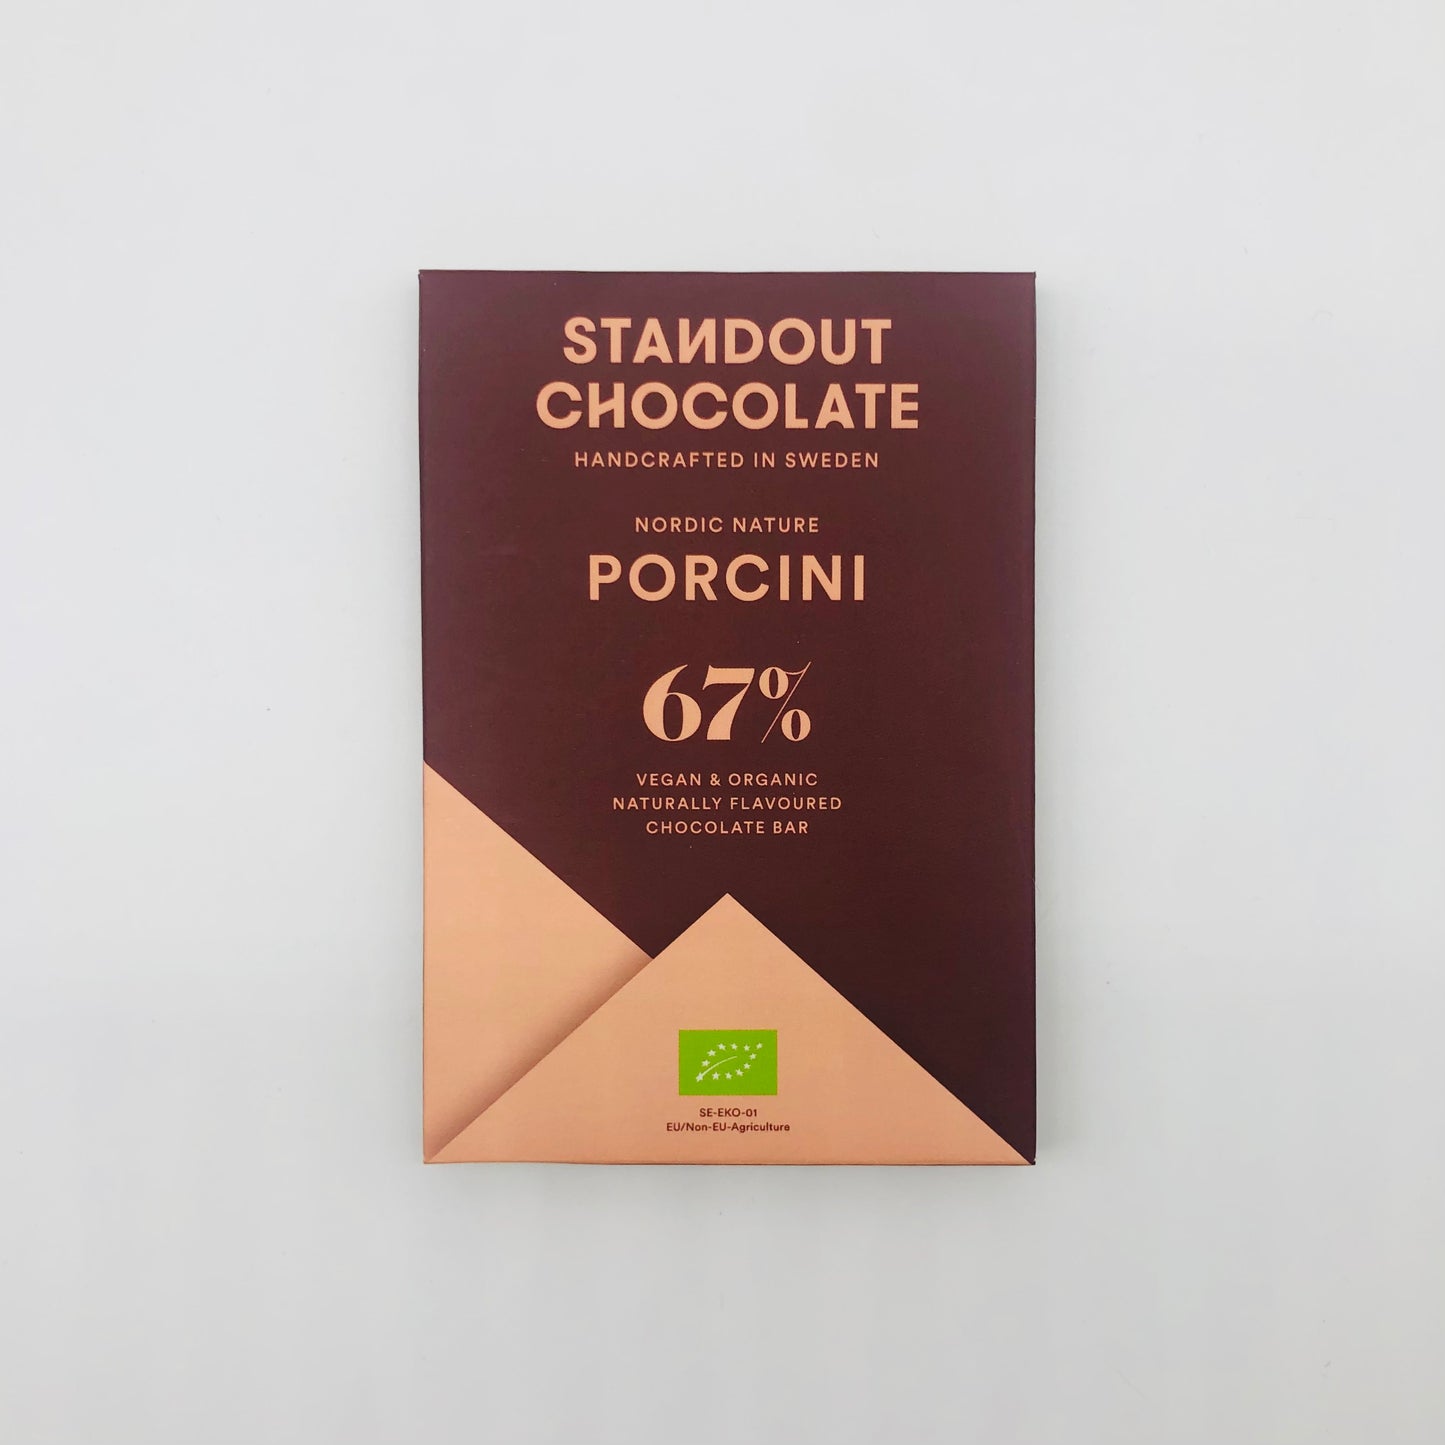 The Porcini mushroom marries extremely well with the Öko Caribe cacao (Dominican Republic) and adds a mild and natural hazelnut-like flavour and balanced umami notes.